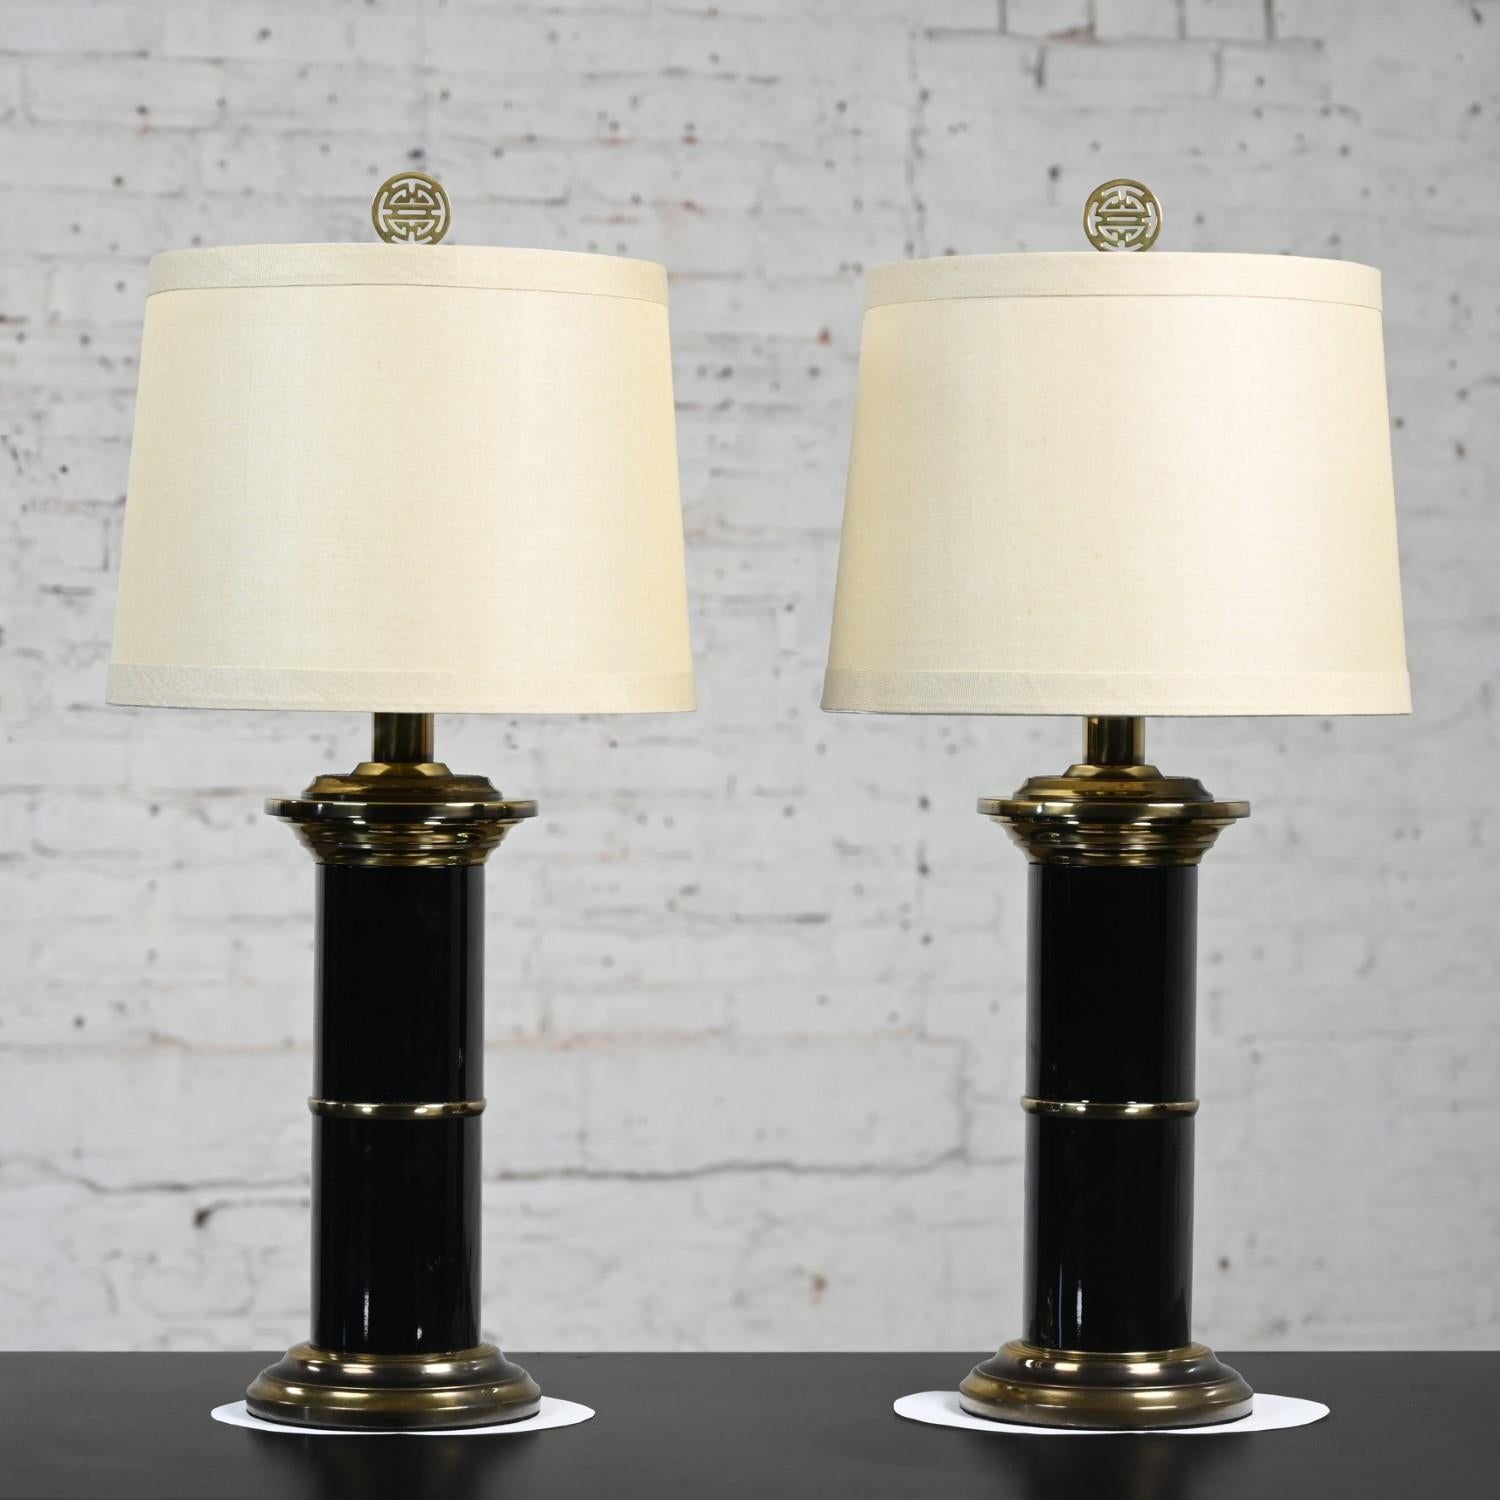 Incredible vintage Hollywood Regency black enameled metal & brass plated detail column table lamps with brass Asian finials and new tan hardback fabric tapered drum shades, a pair. Beautiful condition, keeping in mind that these are vintage and not